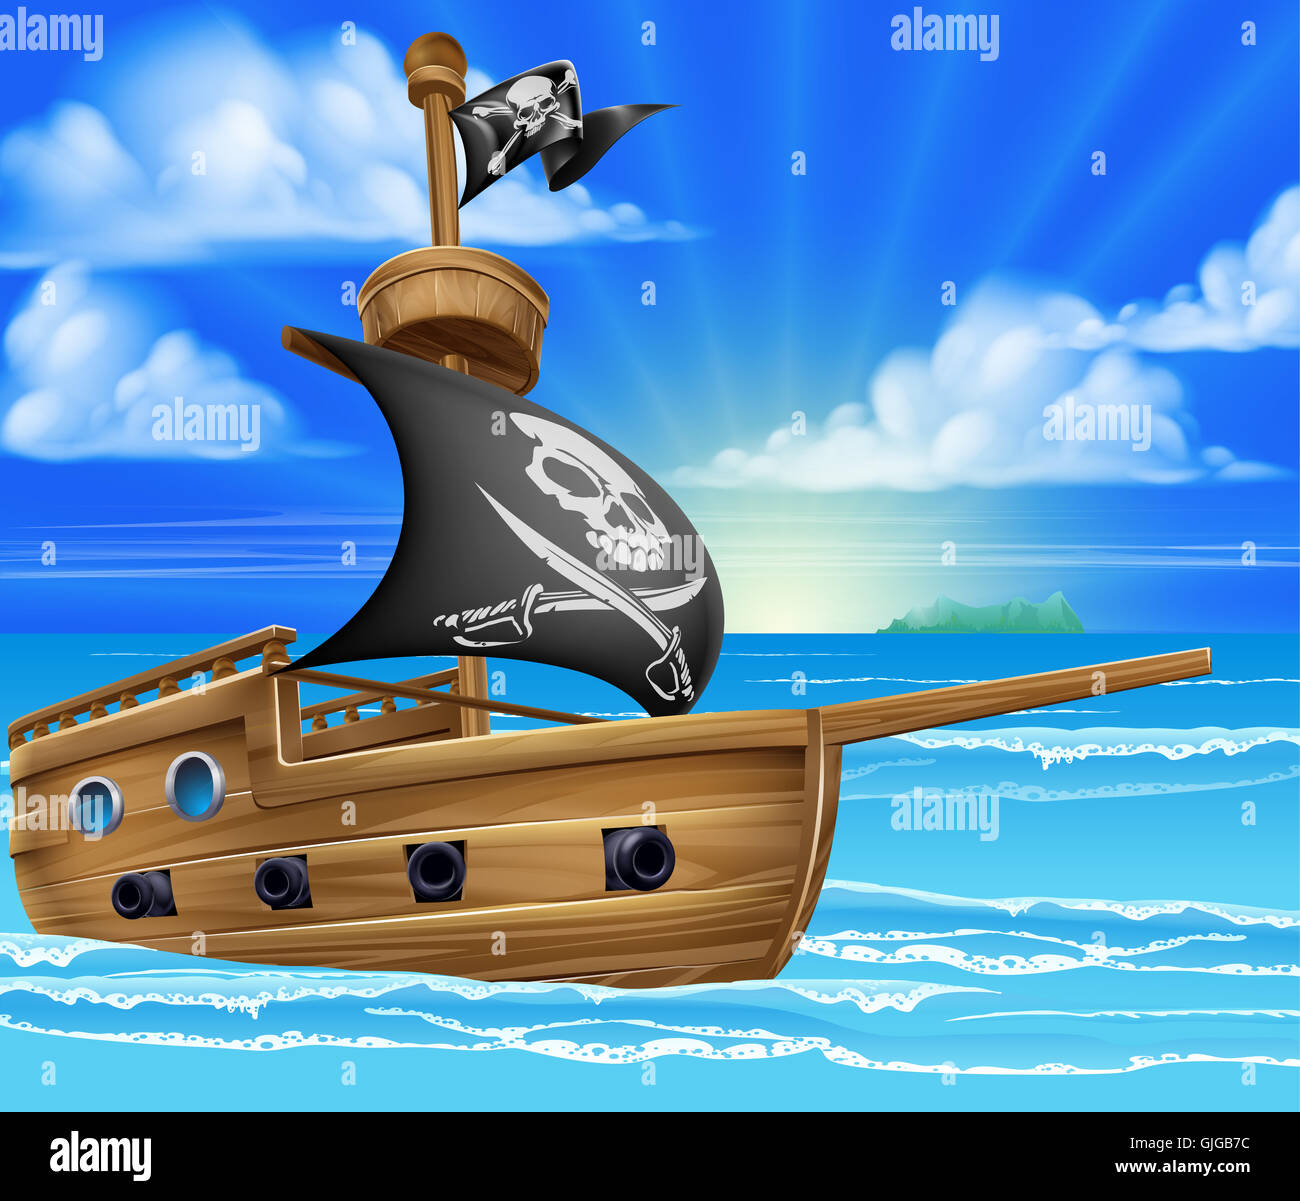 A cartoon pirate ship boat sailing in the ocean with jolly roger skull and crossed bones flag Stock Photo